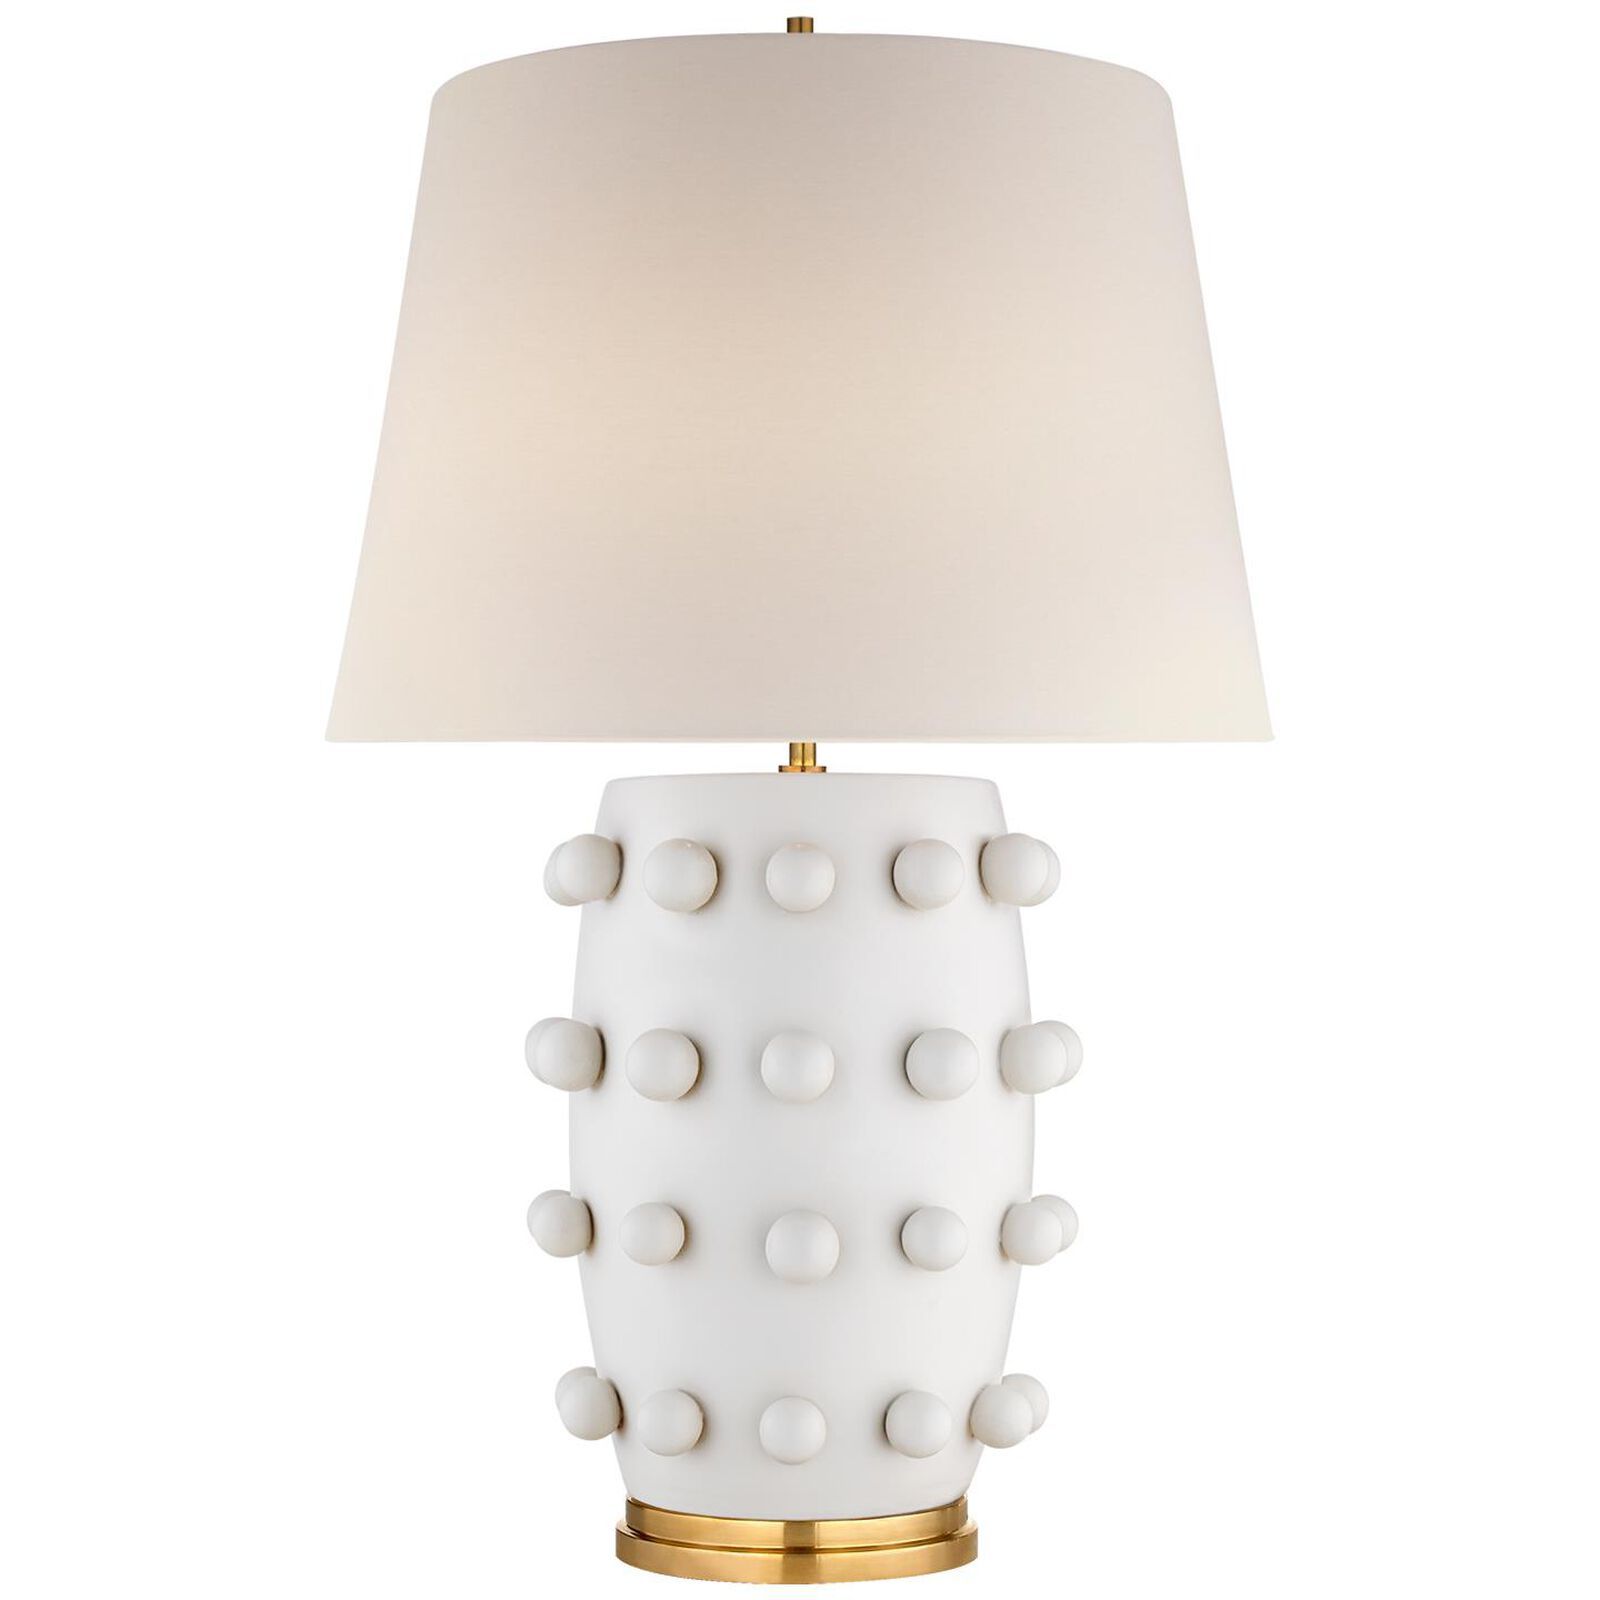 Kelly Wearstler Linden 26 Inch Table Lamp by Visual Comfort Signature Collection | 1800 Lighting